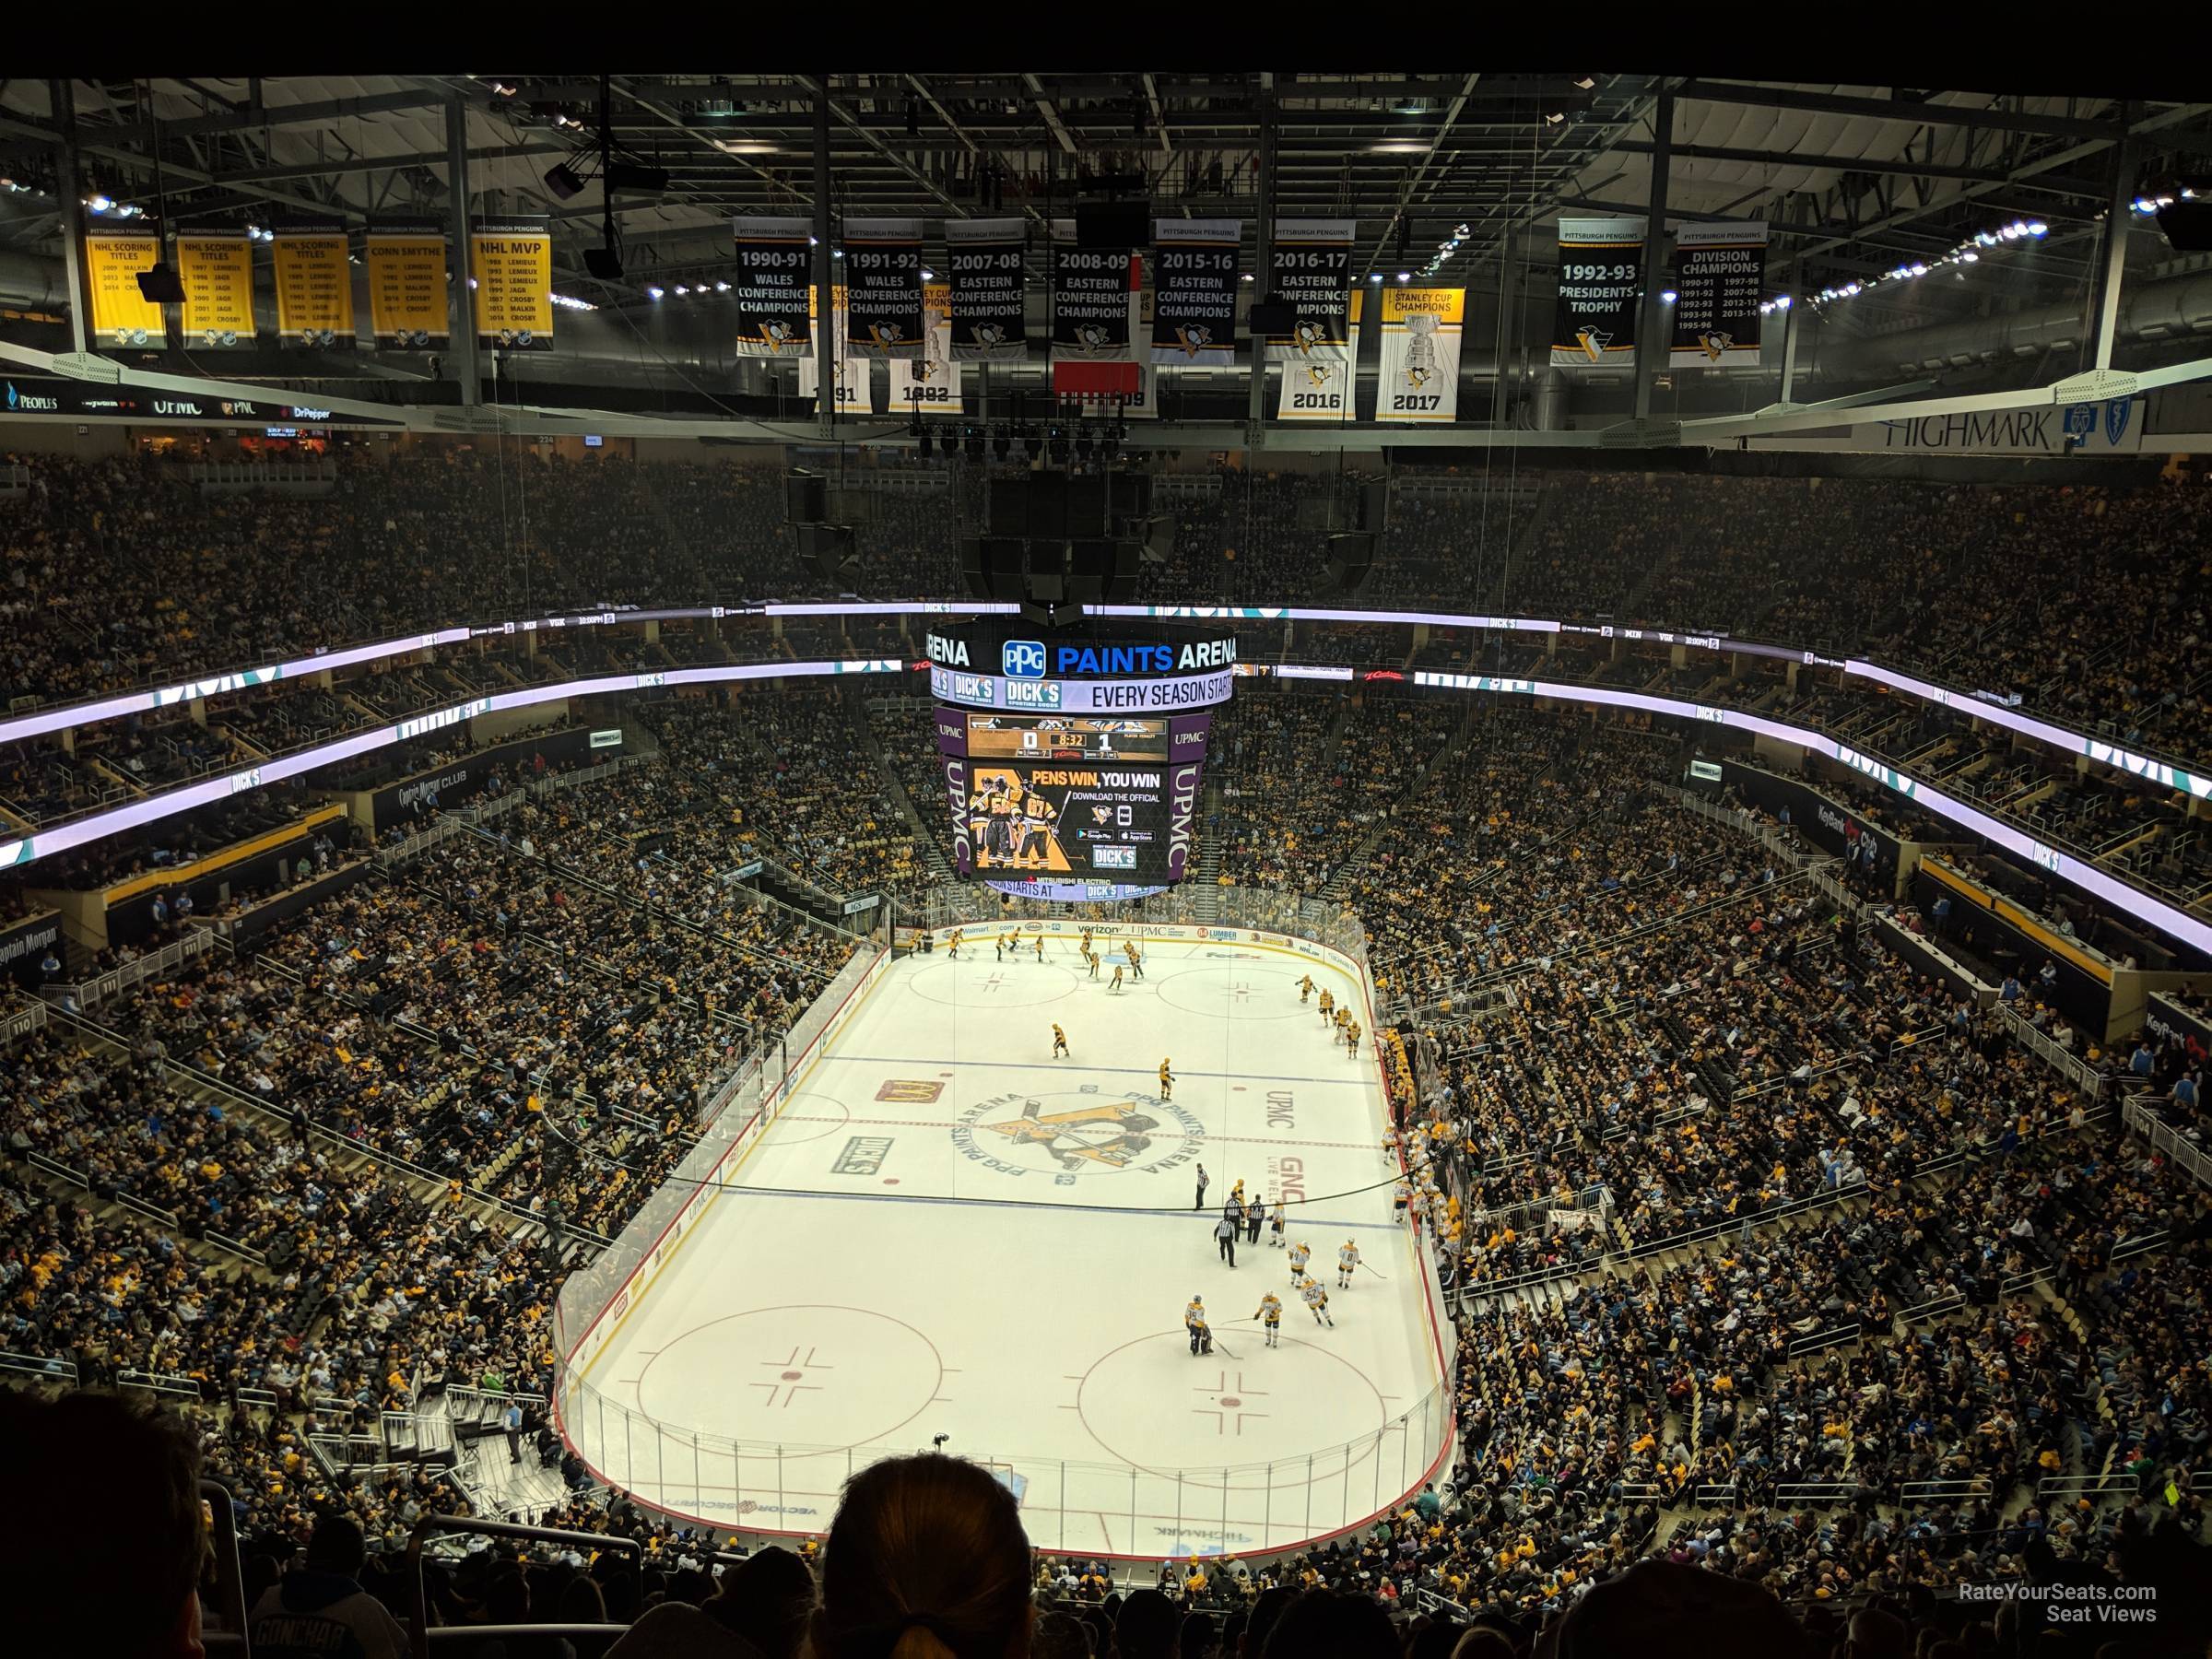 Section 210 at PPG Paints Arena 